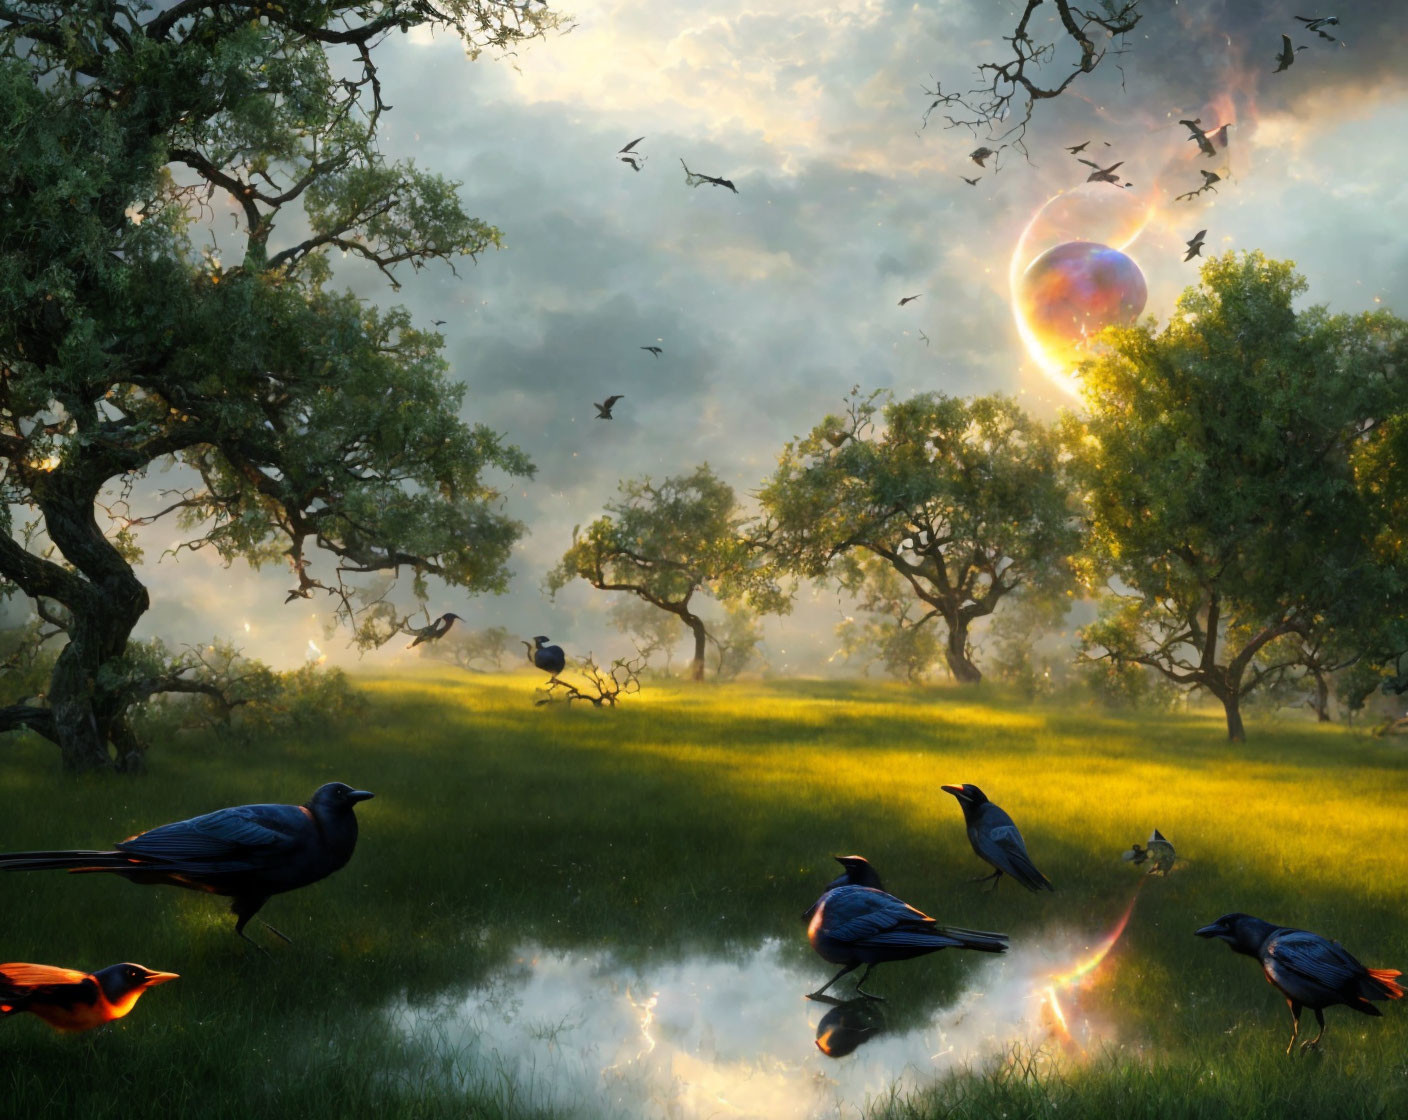 Surreal landscape with birds, reflective pond, green foliage, and glowing orb